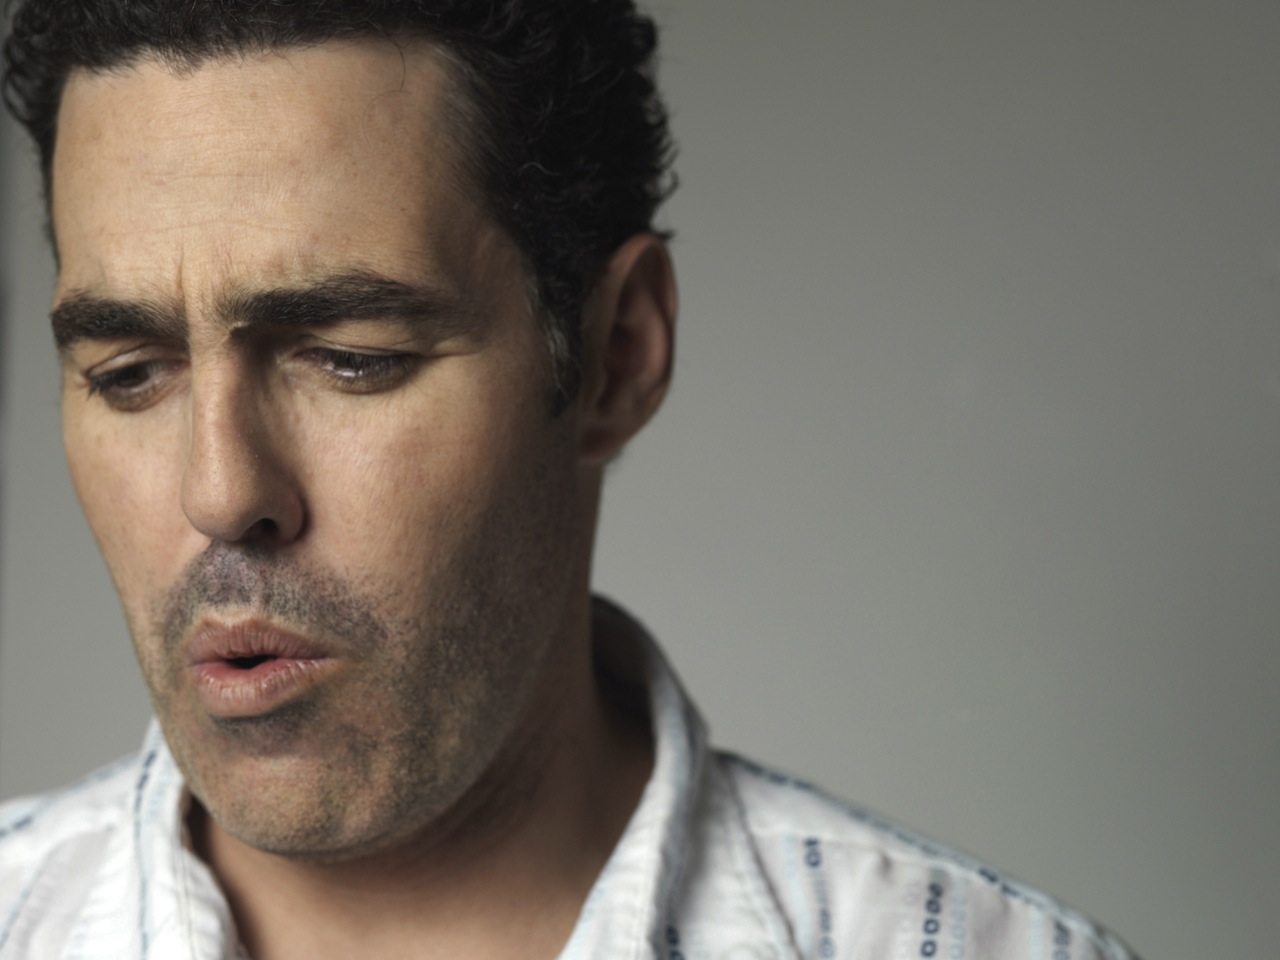 Adam Carolla: 'We've Lost the Eye of the Tiger'